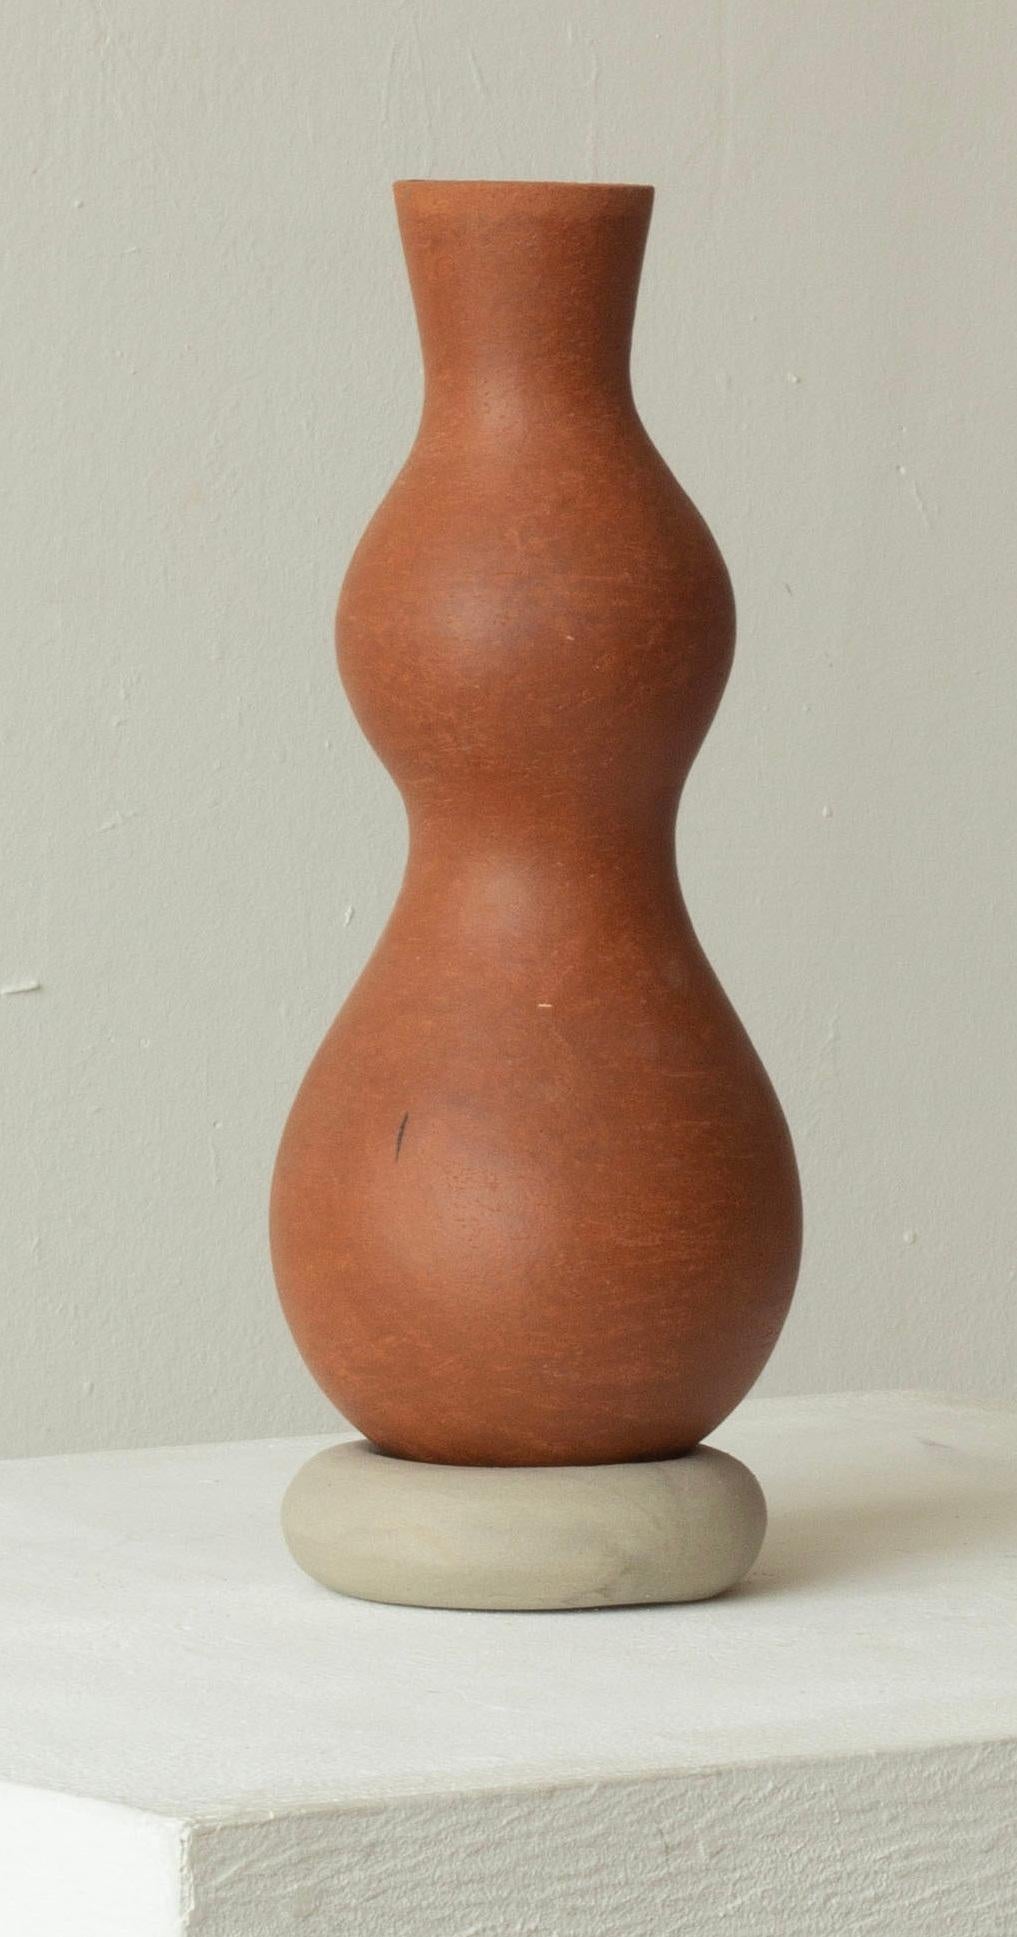 Woman 226 Vase by Karina Smagulova
One of a Kind.
Dimensions: Ø 10 x H 24 cm.
Materials: Terracotta and grey stoneware.
​
With an Armenian and Kazakhstan heritage, Karina Smagulova was born in Greece in 1995 and graduated with a diploma in